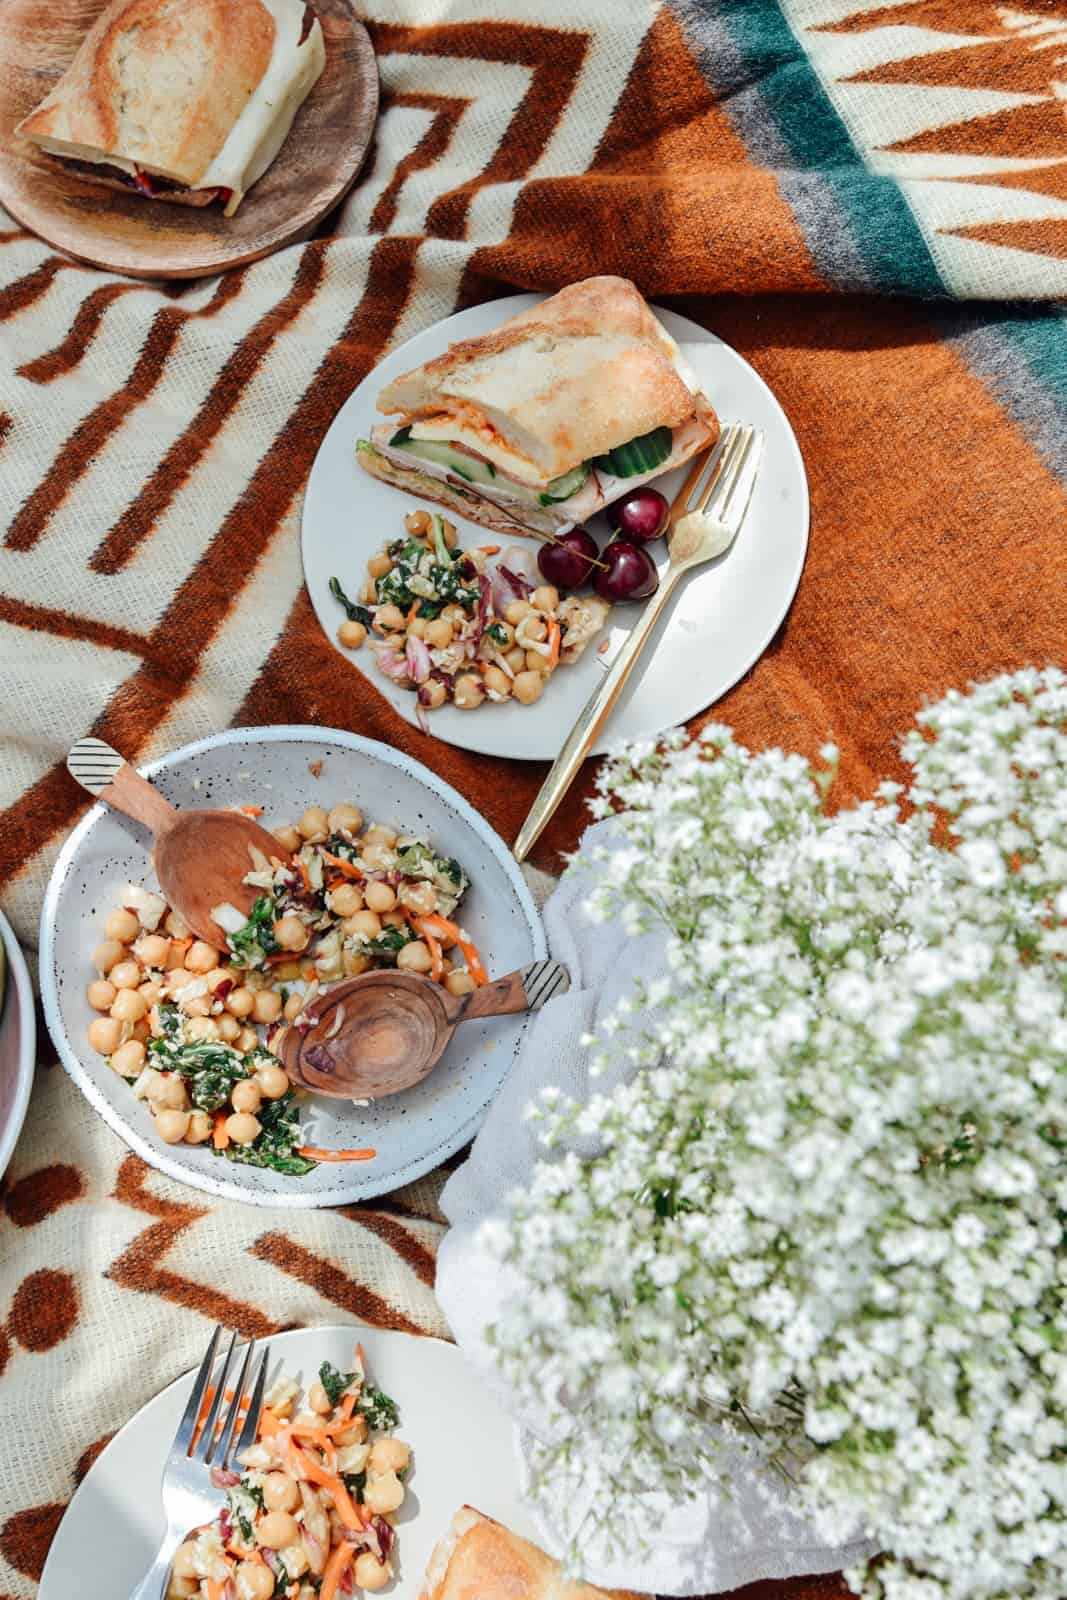 A Sandwich and salad picnic on a blanket.